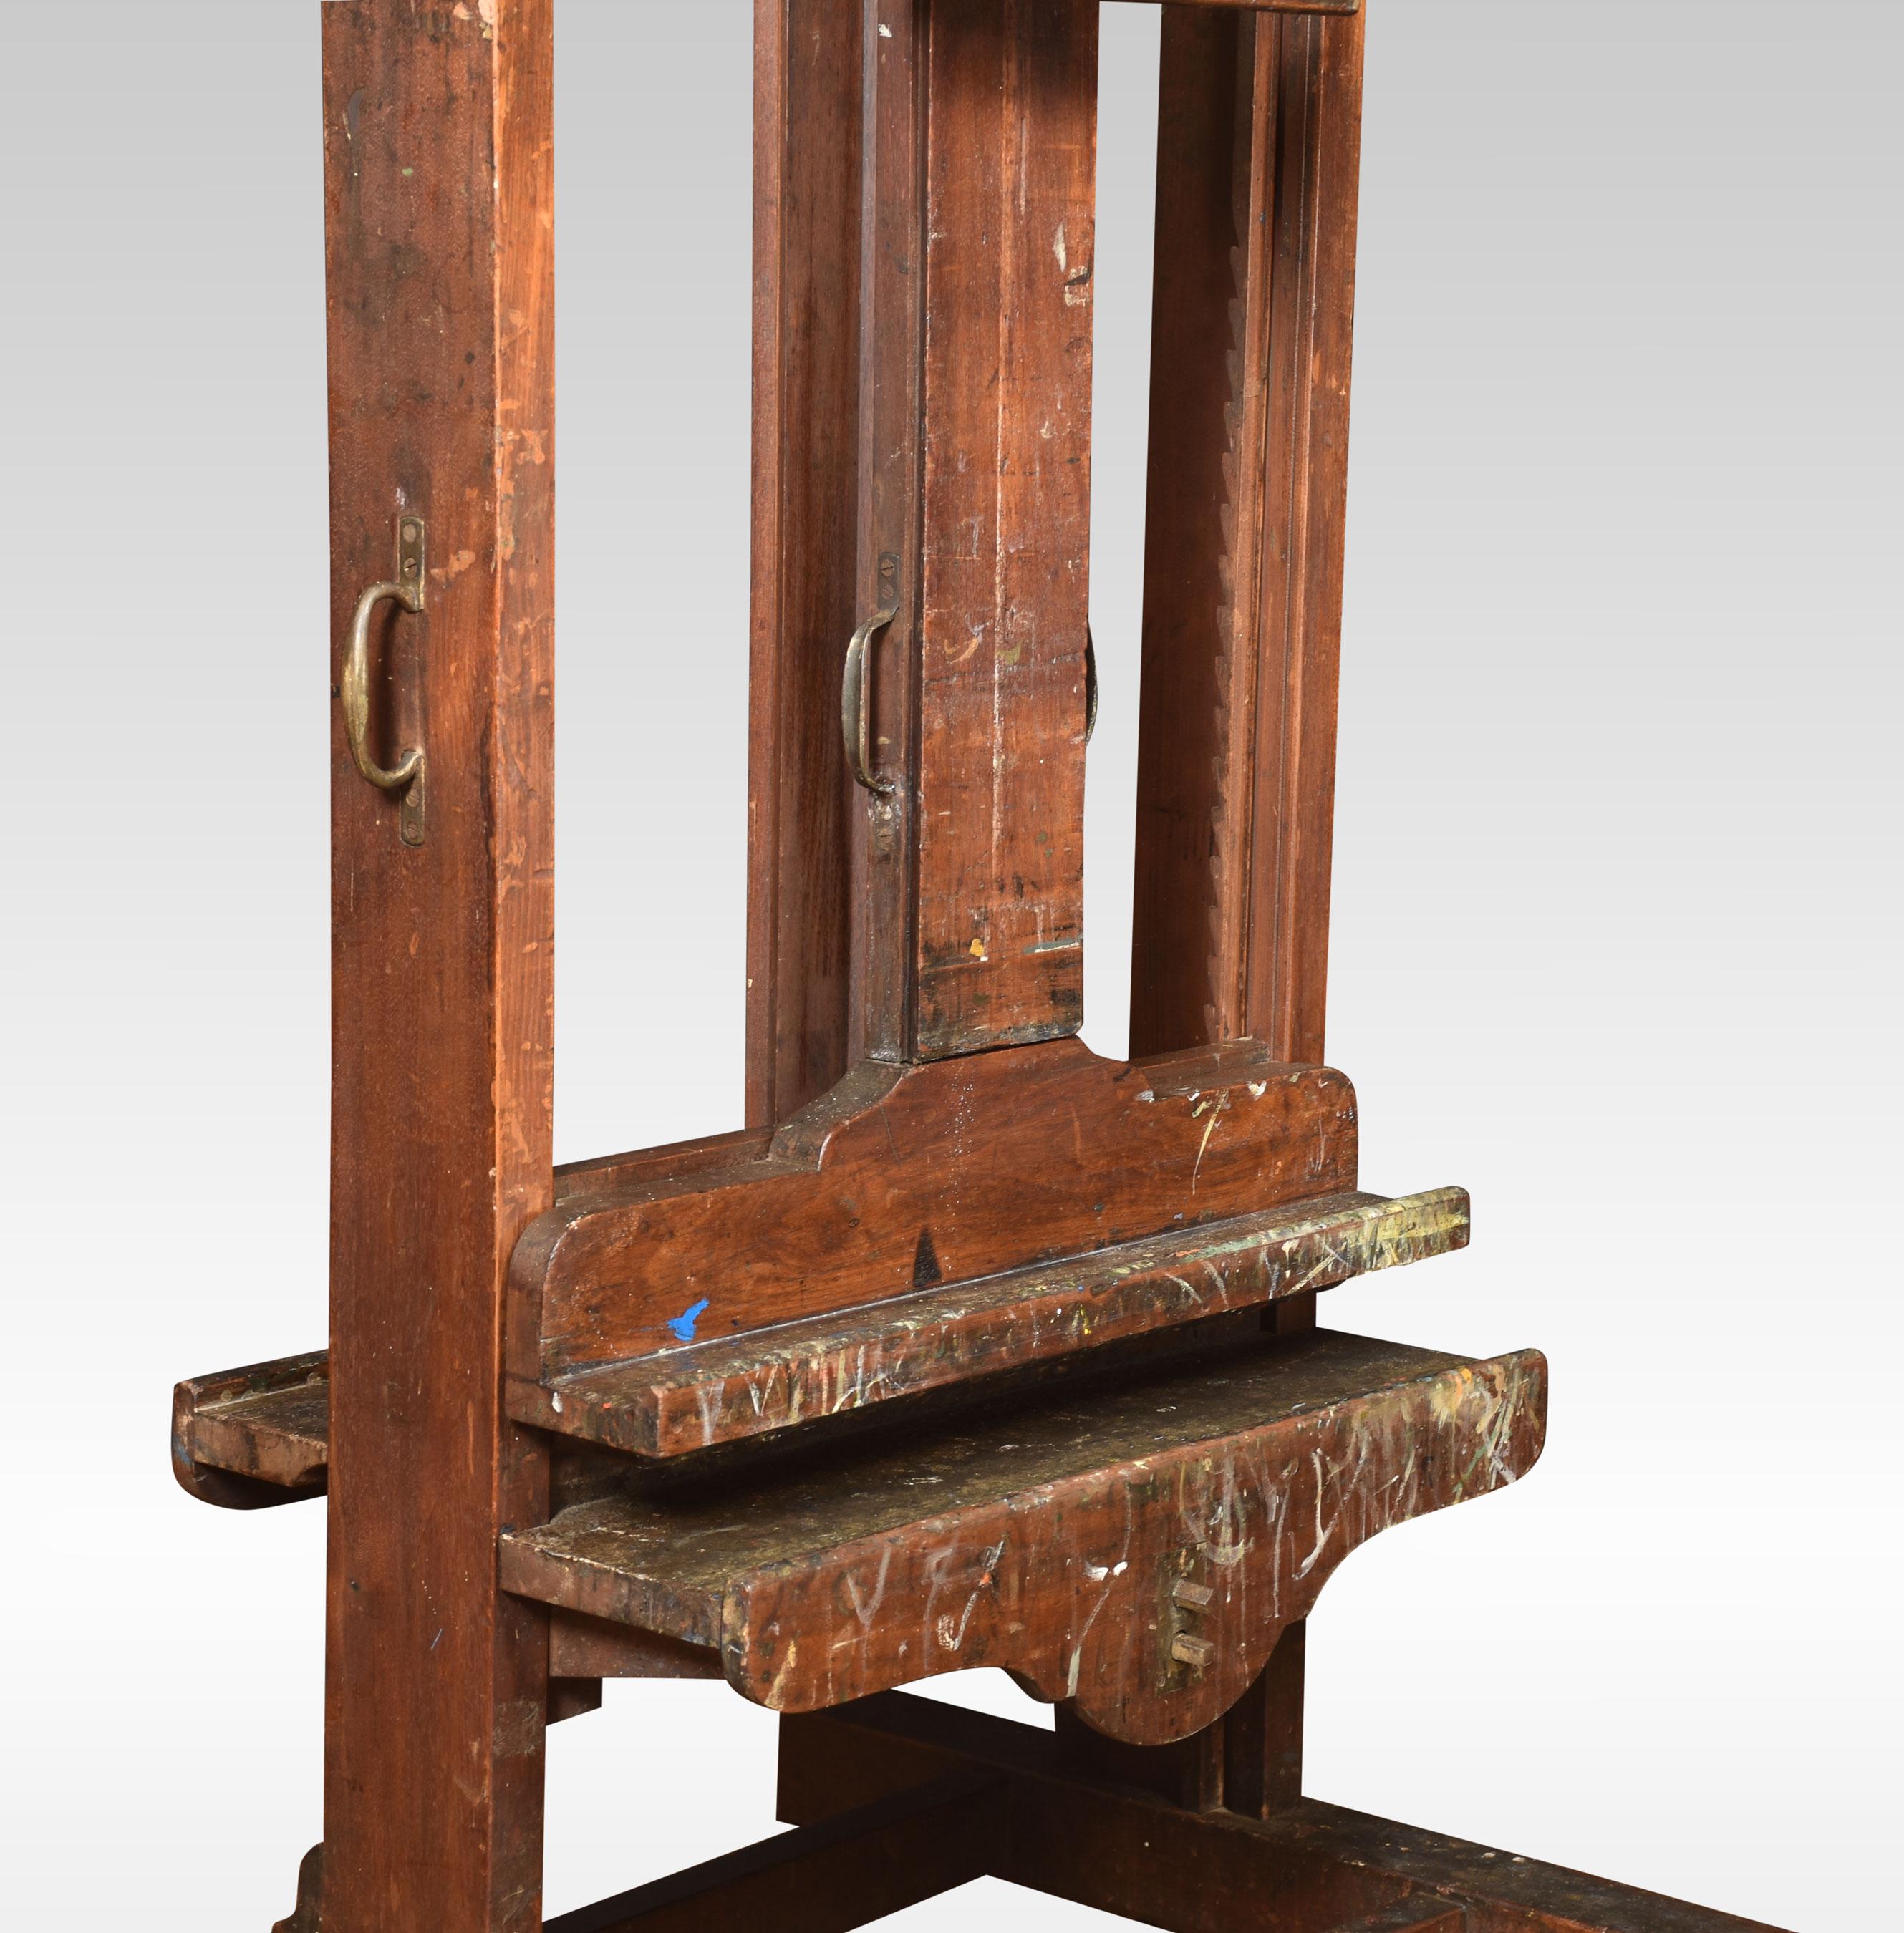 Walnut artist’s double-sided easel, with adjustable mechanism, raised up on trestle base terminating in casters
Dimensions:
Height 78 Inches
Width 27 Inches
Depth 30 Inches.